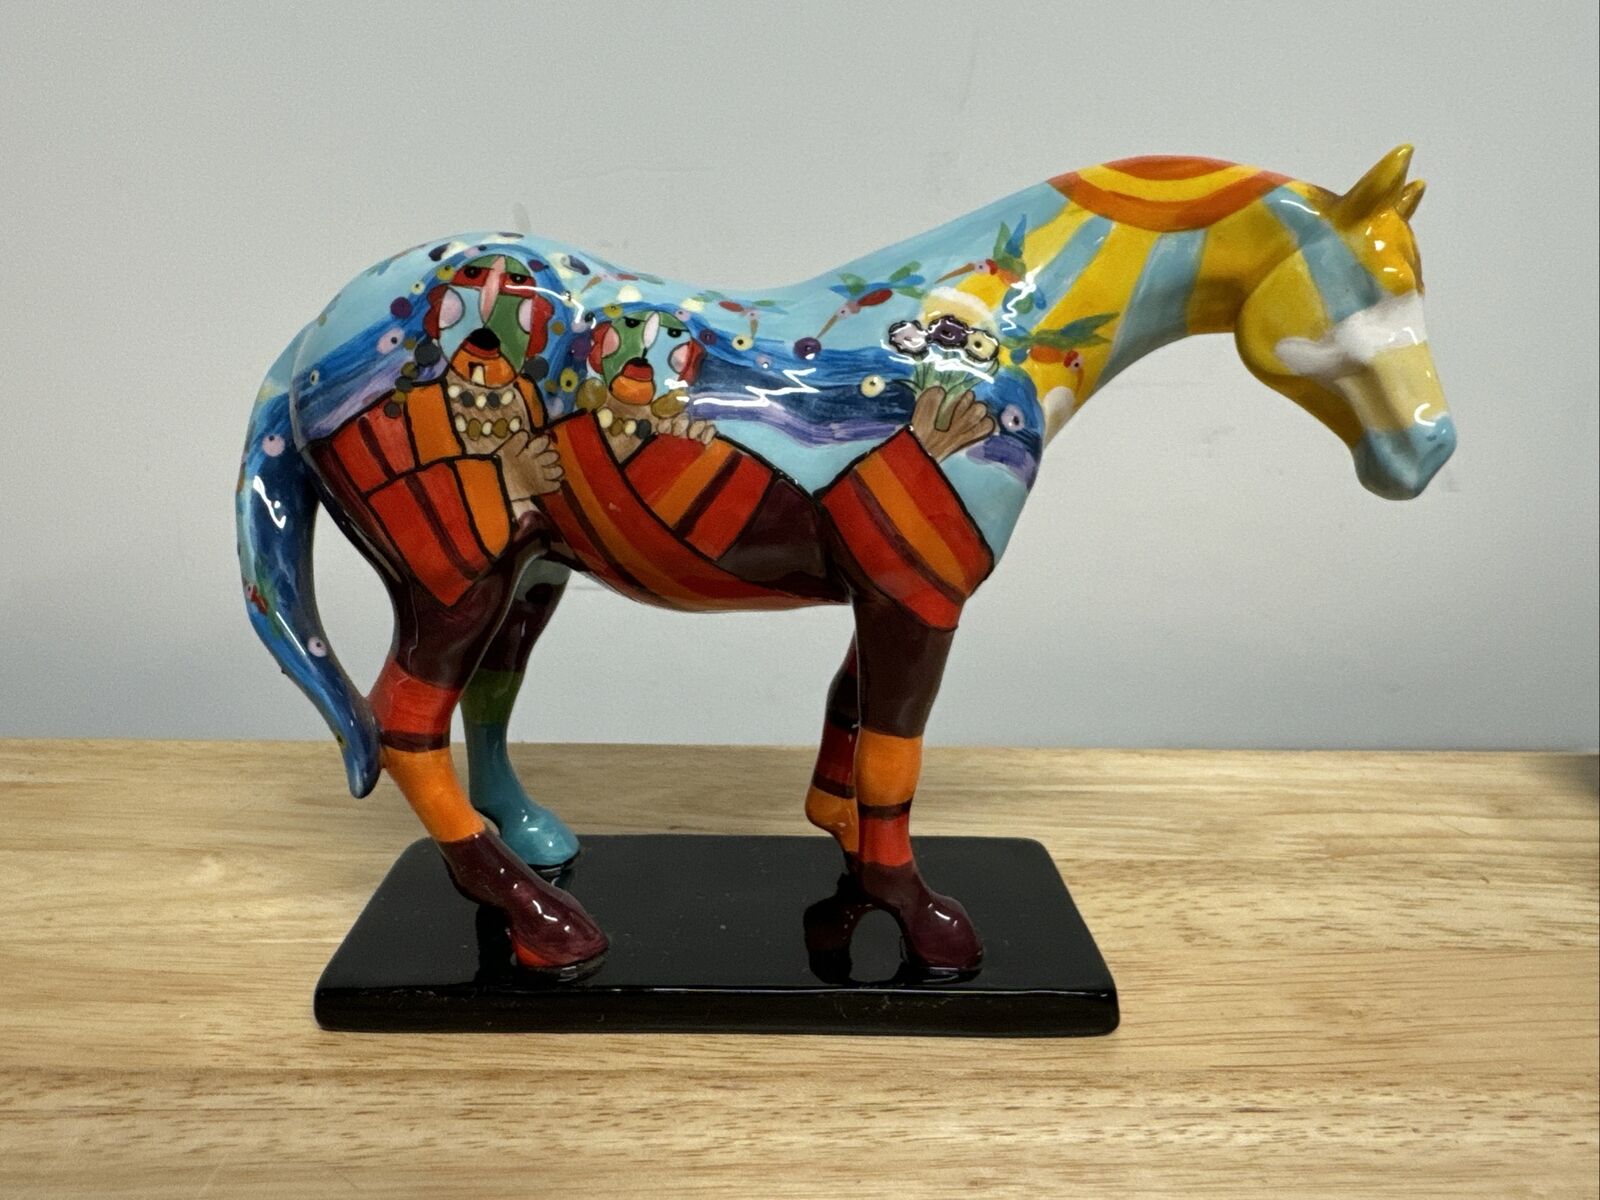 2004 Trail of Painted Ponies “Love As Strong As A Horse” #1595 1E/9349 Signed